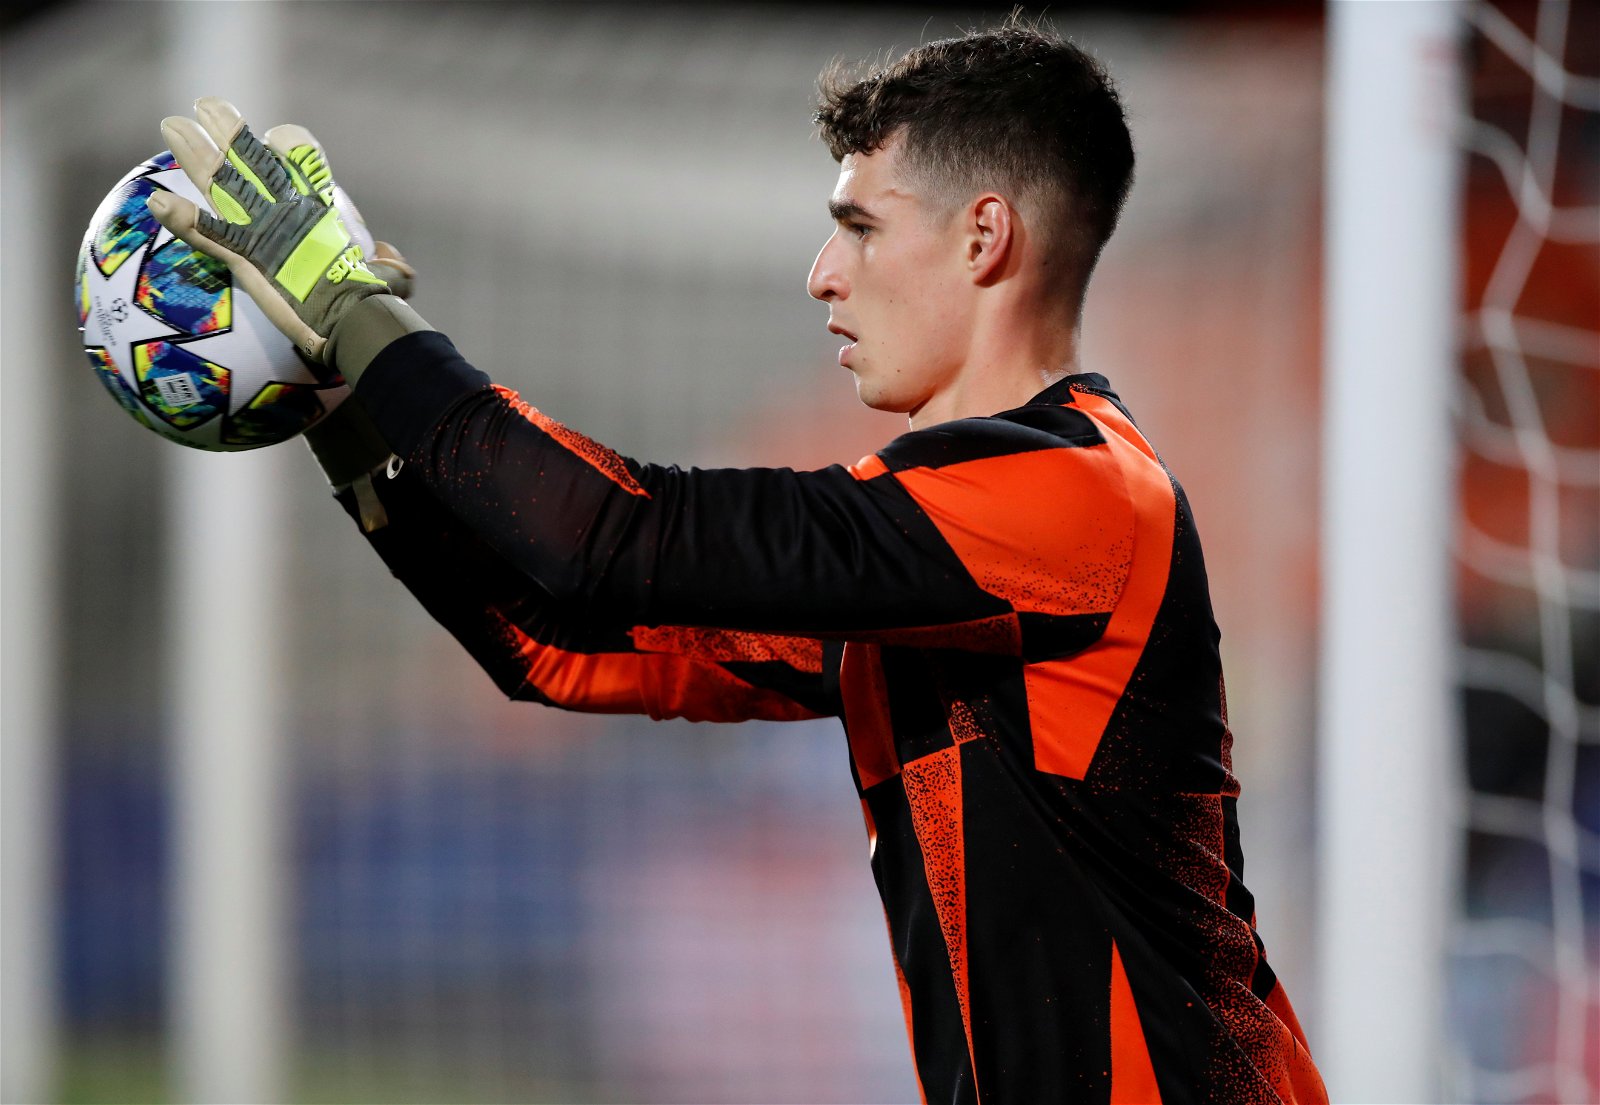 Ballon d'Or rankings reveal Kepa as one of the top 10 goalkeepers